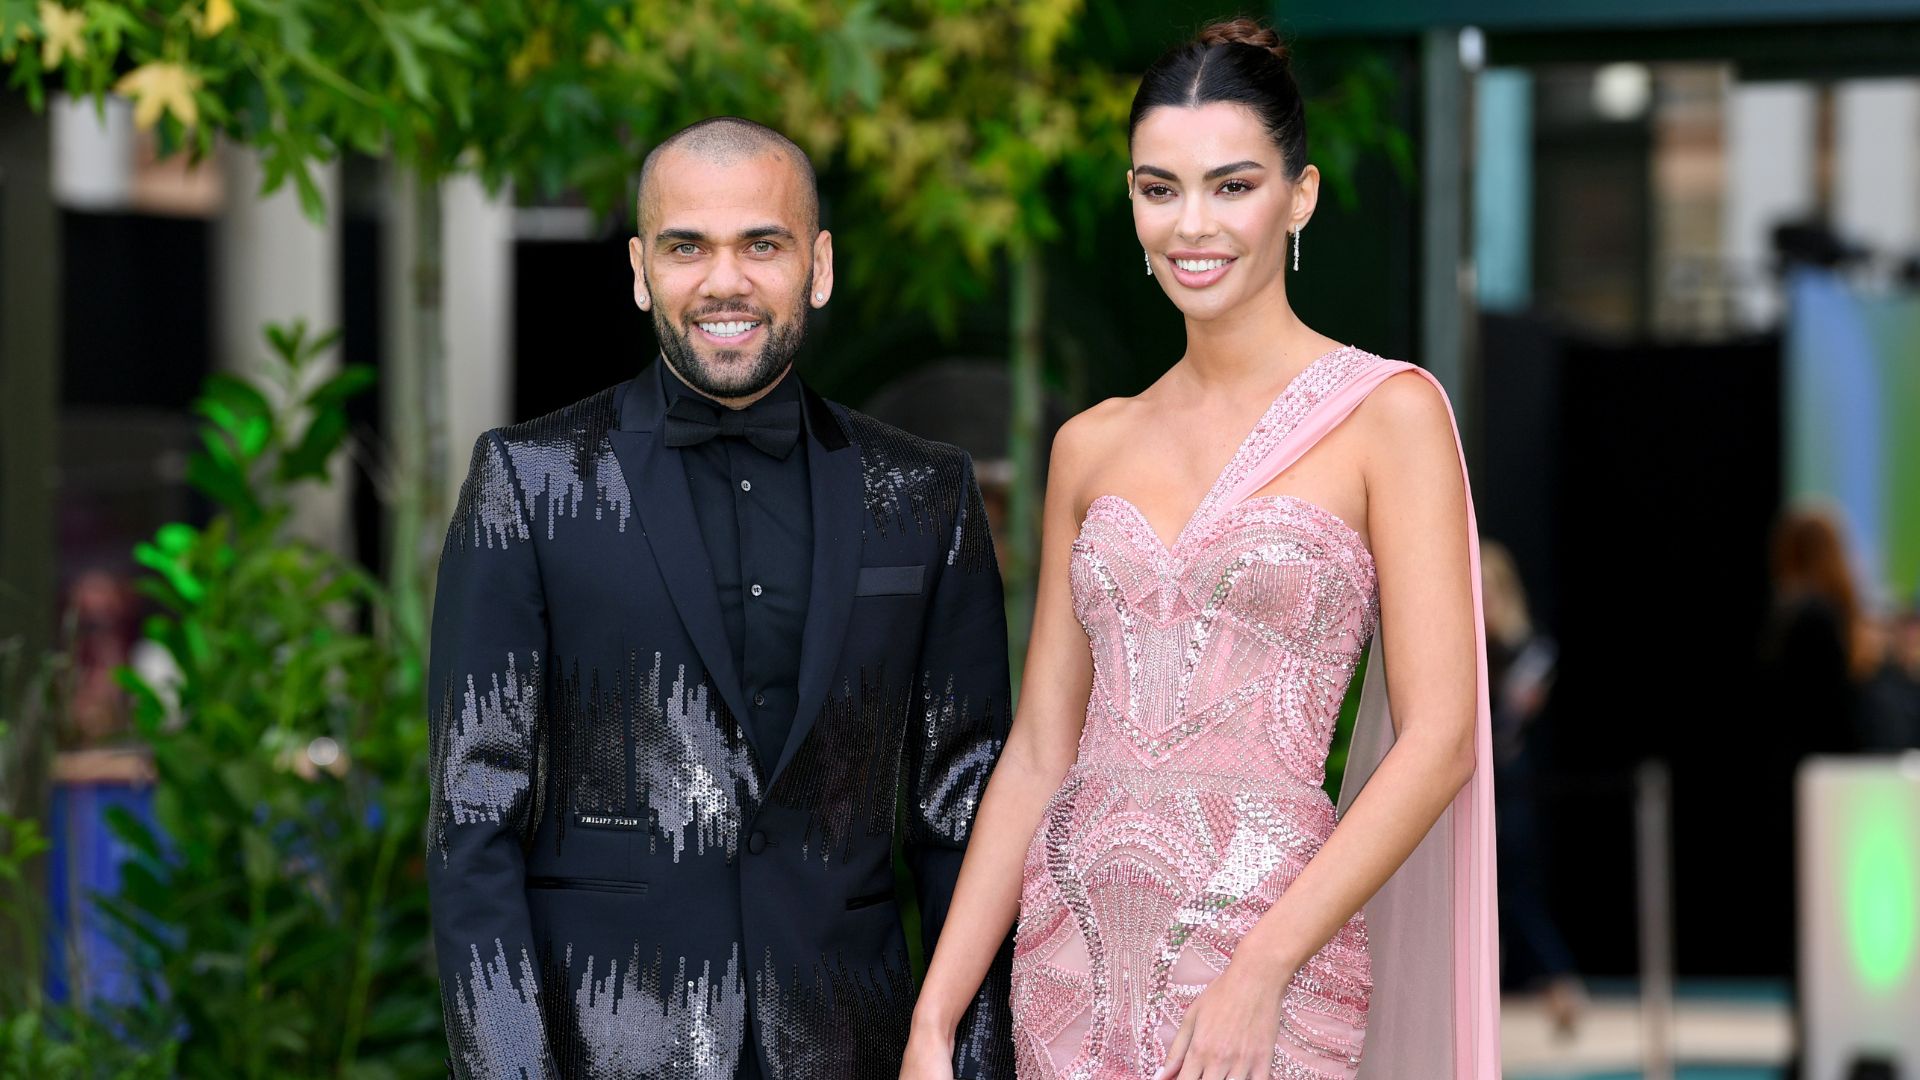 Daniel Alves next to Joana Sanz, his wife at the time he was accused of rape (Credit: Getty Images)